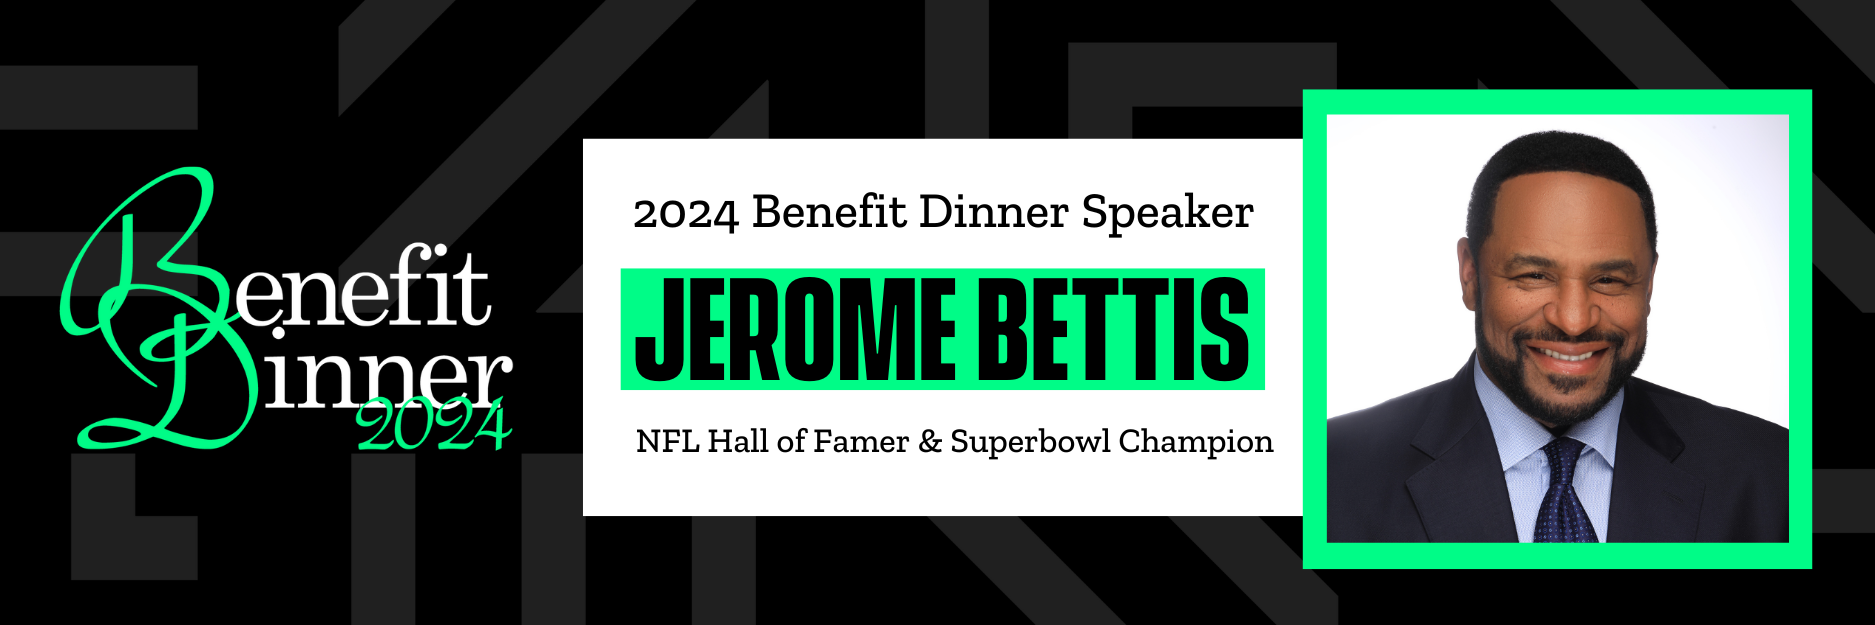 On the left is the 2024 Benefit Dinner logo. To the right of that are the words 